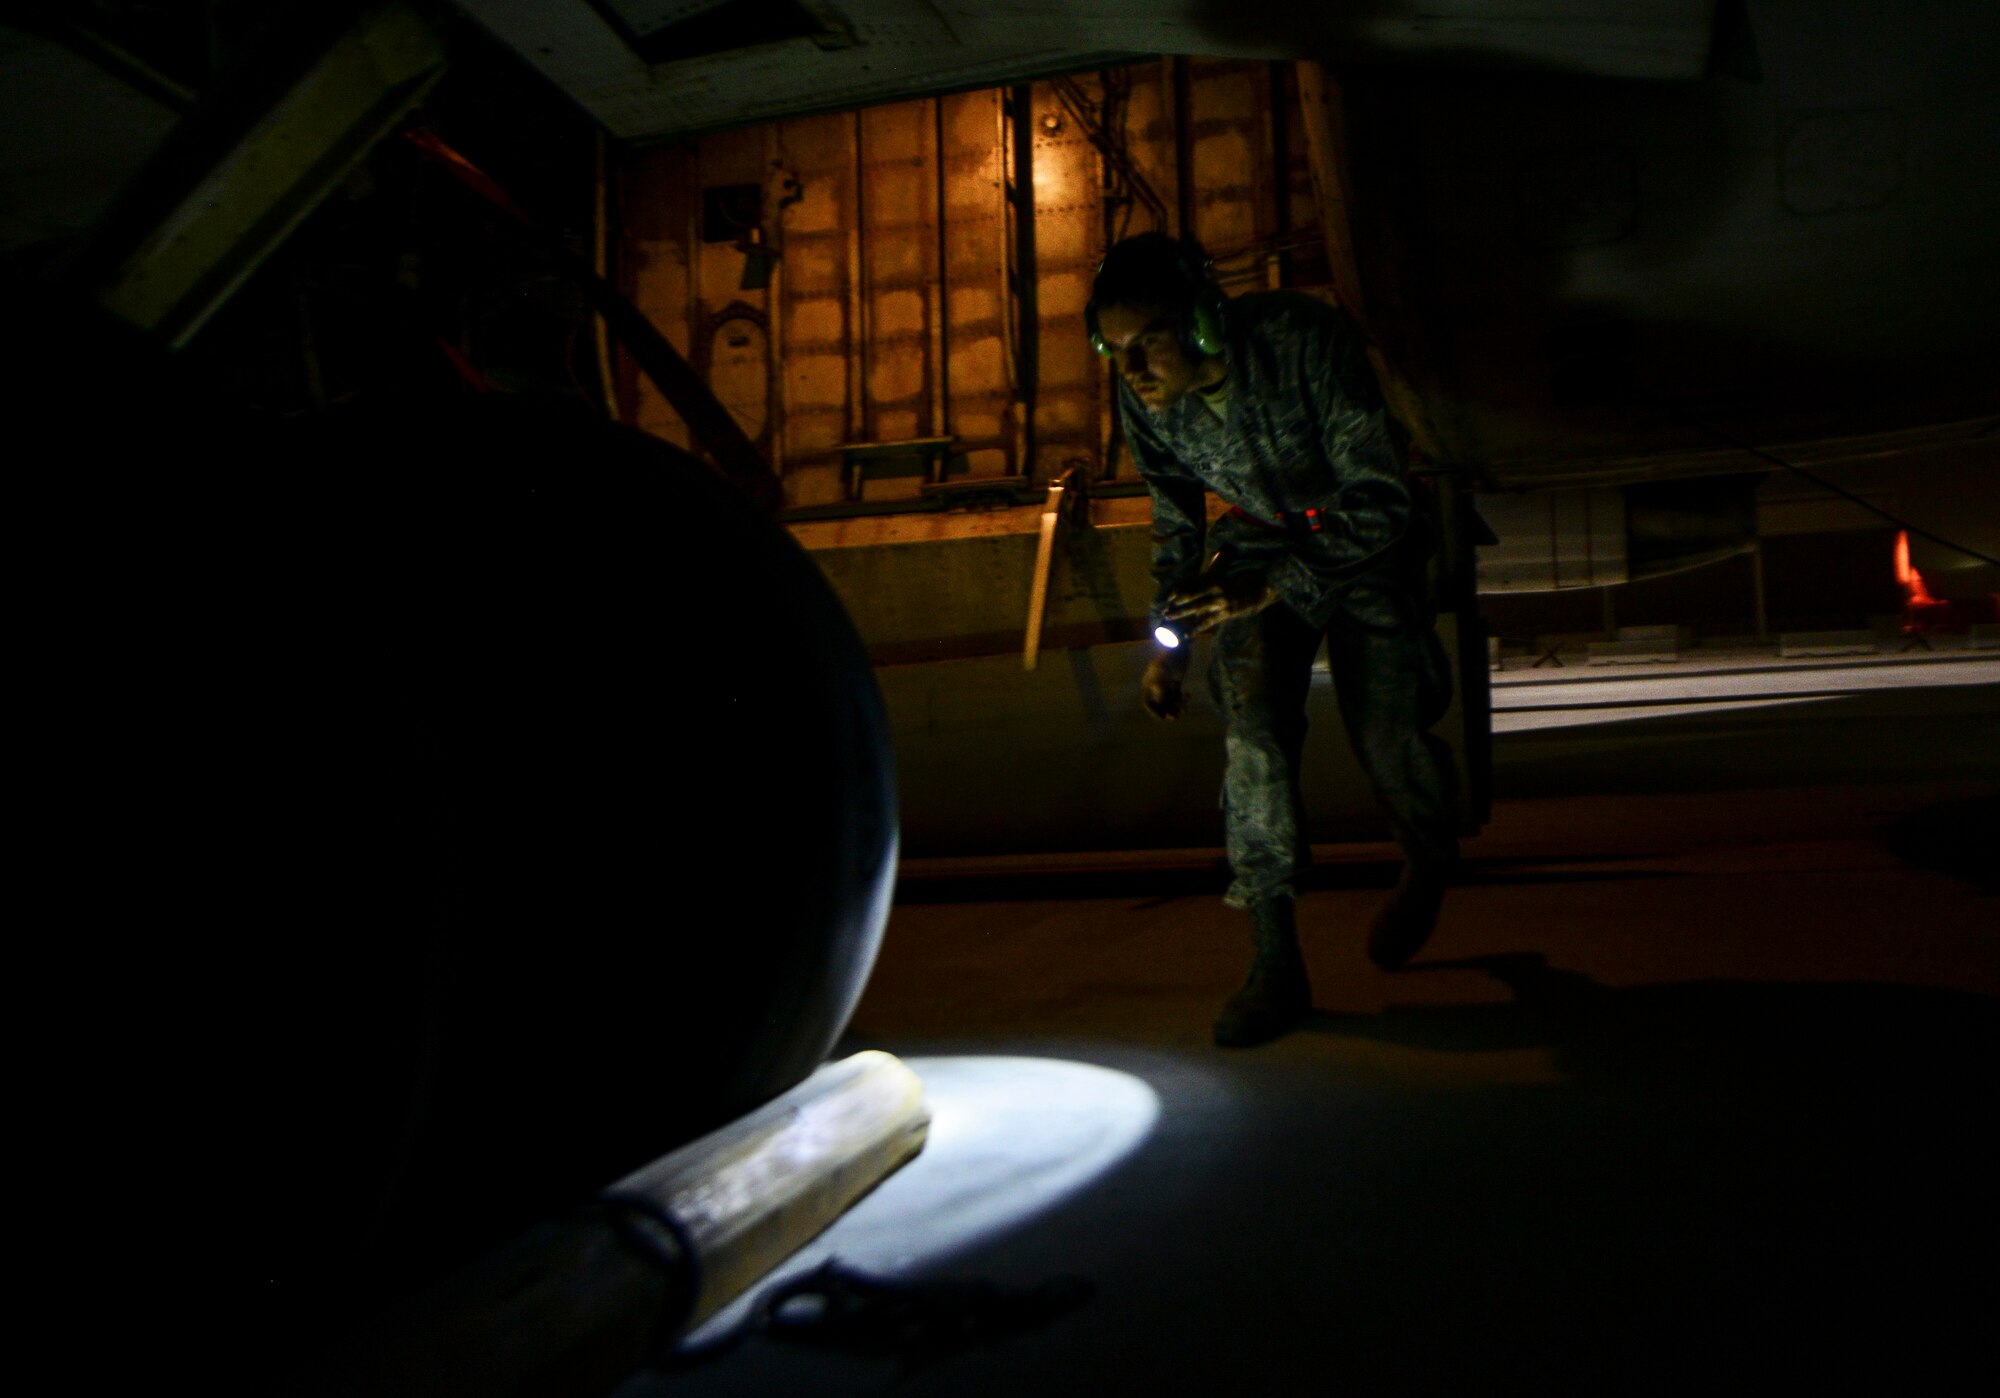 Staff Sgt. Balcerzak, 7th Air Mobility Unit crew chief, inspects the tires of an E-8C Joint Surveillance Target Attack Radar Systems prior to aircrew arrival June 8, 2016, at Al Udeid Air Base, Qatar. The 7th Expeditionary Airborne Command and Control Squadron and 7th AMU work alongside each other to check the aircraft for hazards, chalk the tires and ensure the pilots can exit the flight line safely. (U.S. Air Force photo/Senior Airman Janelle Patiño/Released)